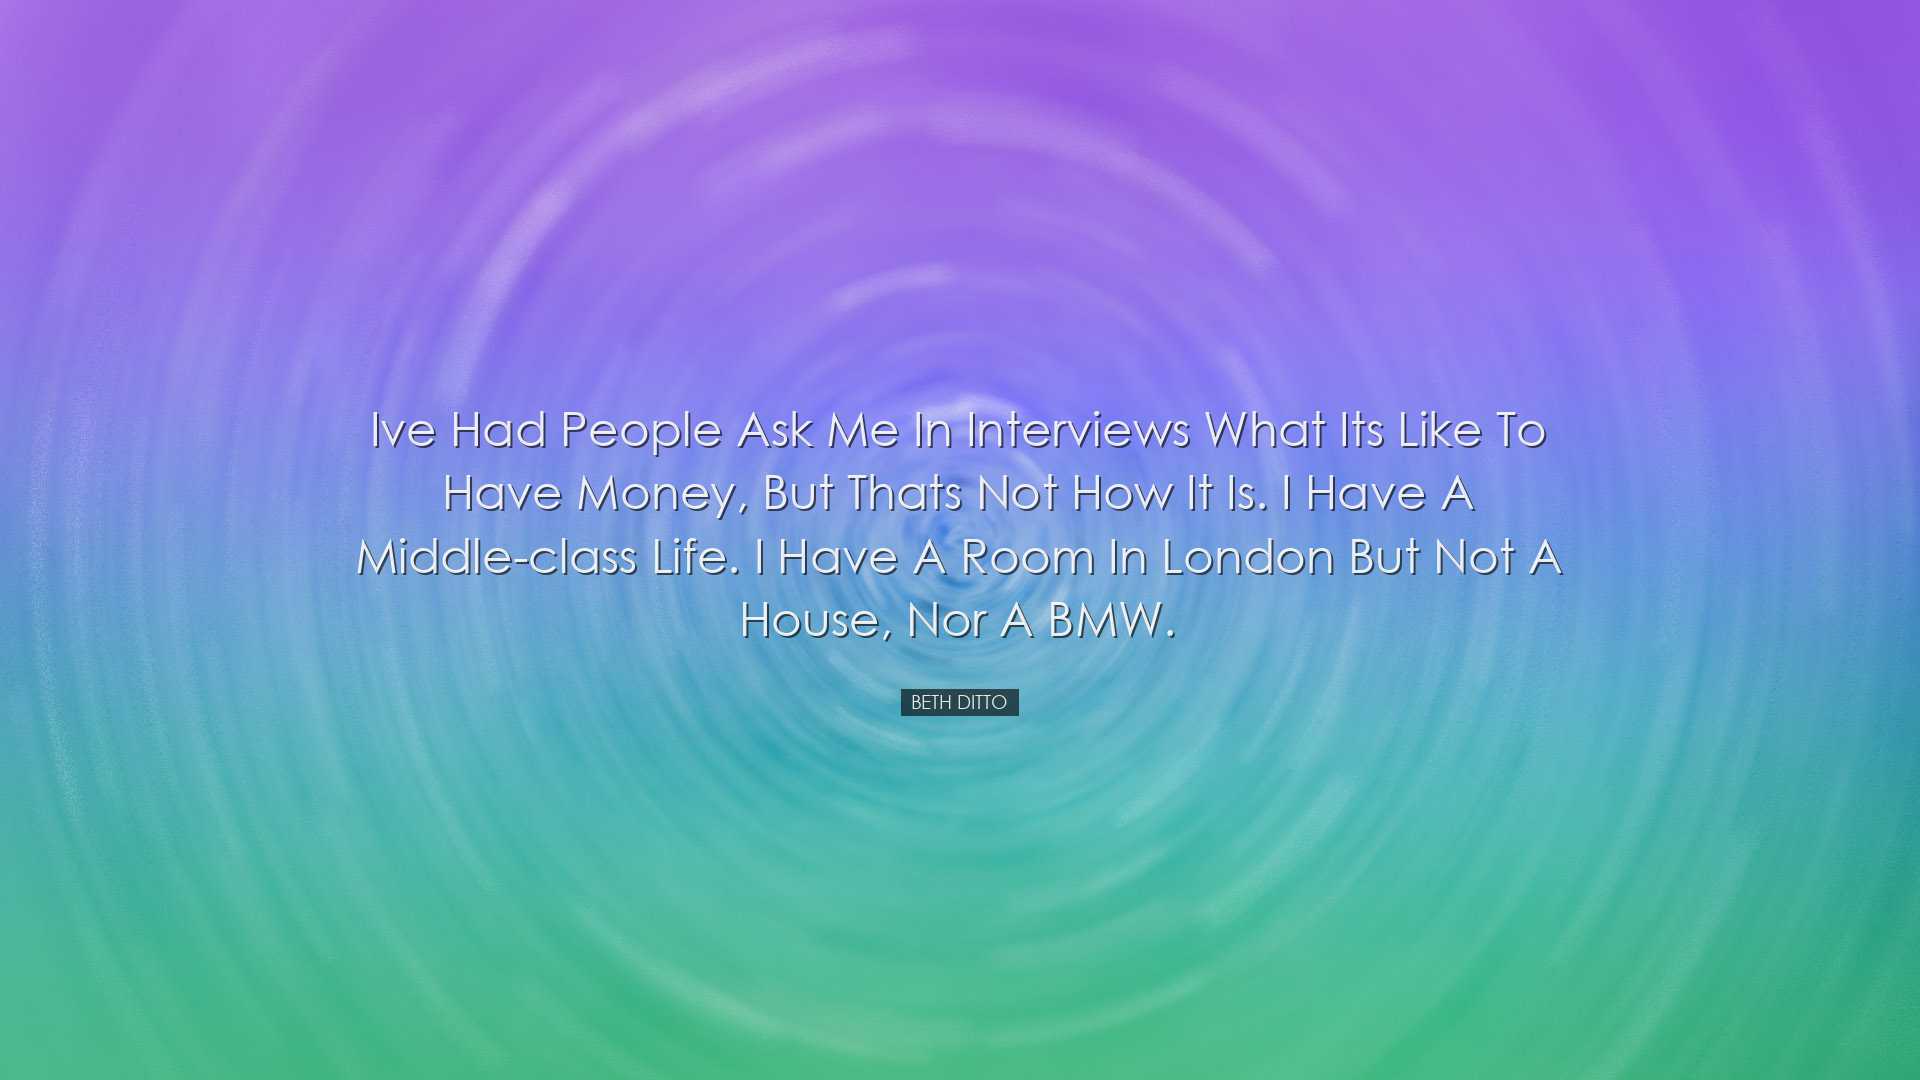 Ive had people ask me in interviews what its like to have money, b